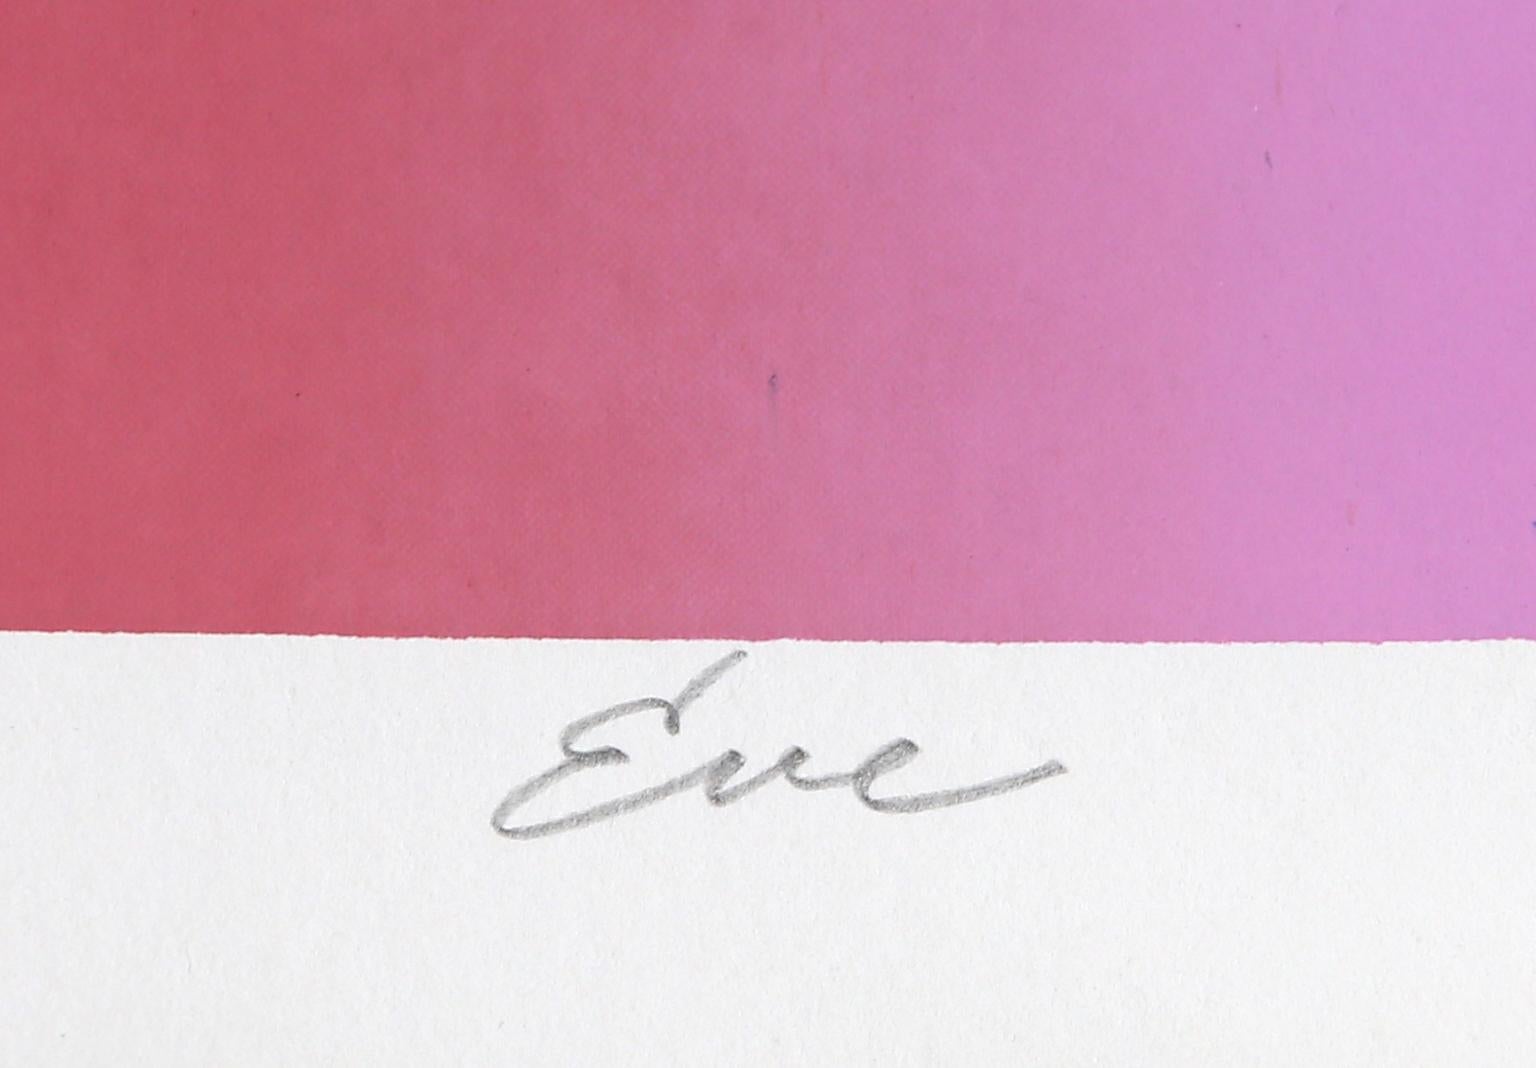 Artist: Roy Ahlgren, American (1927 - 2011)
Title: Eve (Pink)
Year: 1974
Medium: Silkscreen, signed and numbered in pencil
Edition: AP
Image Size: 18 x 18 inches
Size: 20 x 20 in. (50.8 x 50.8 cm)